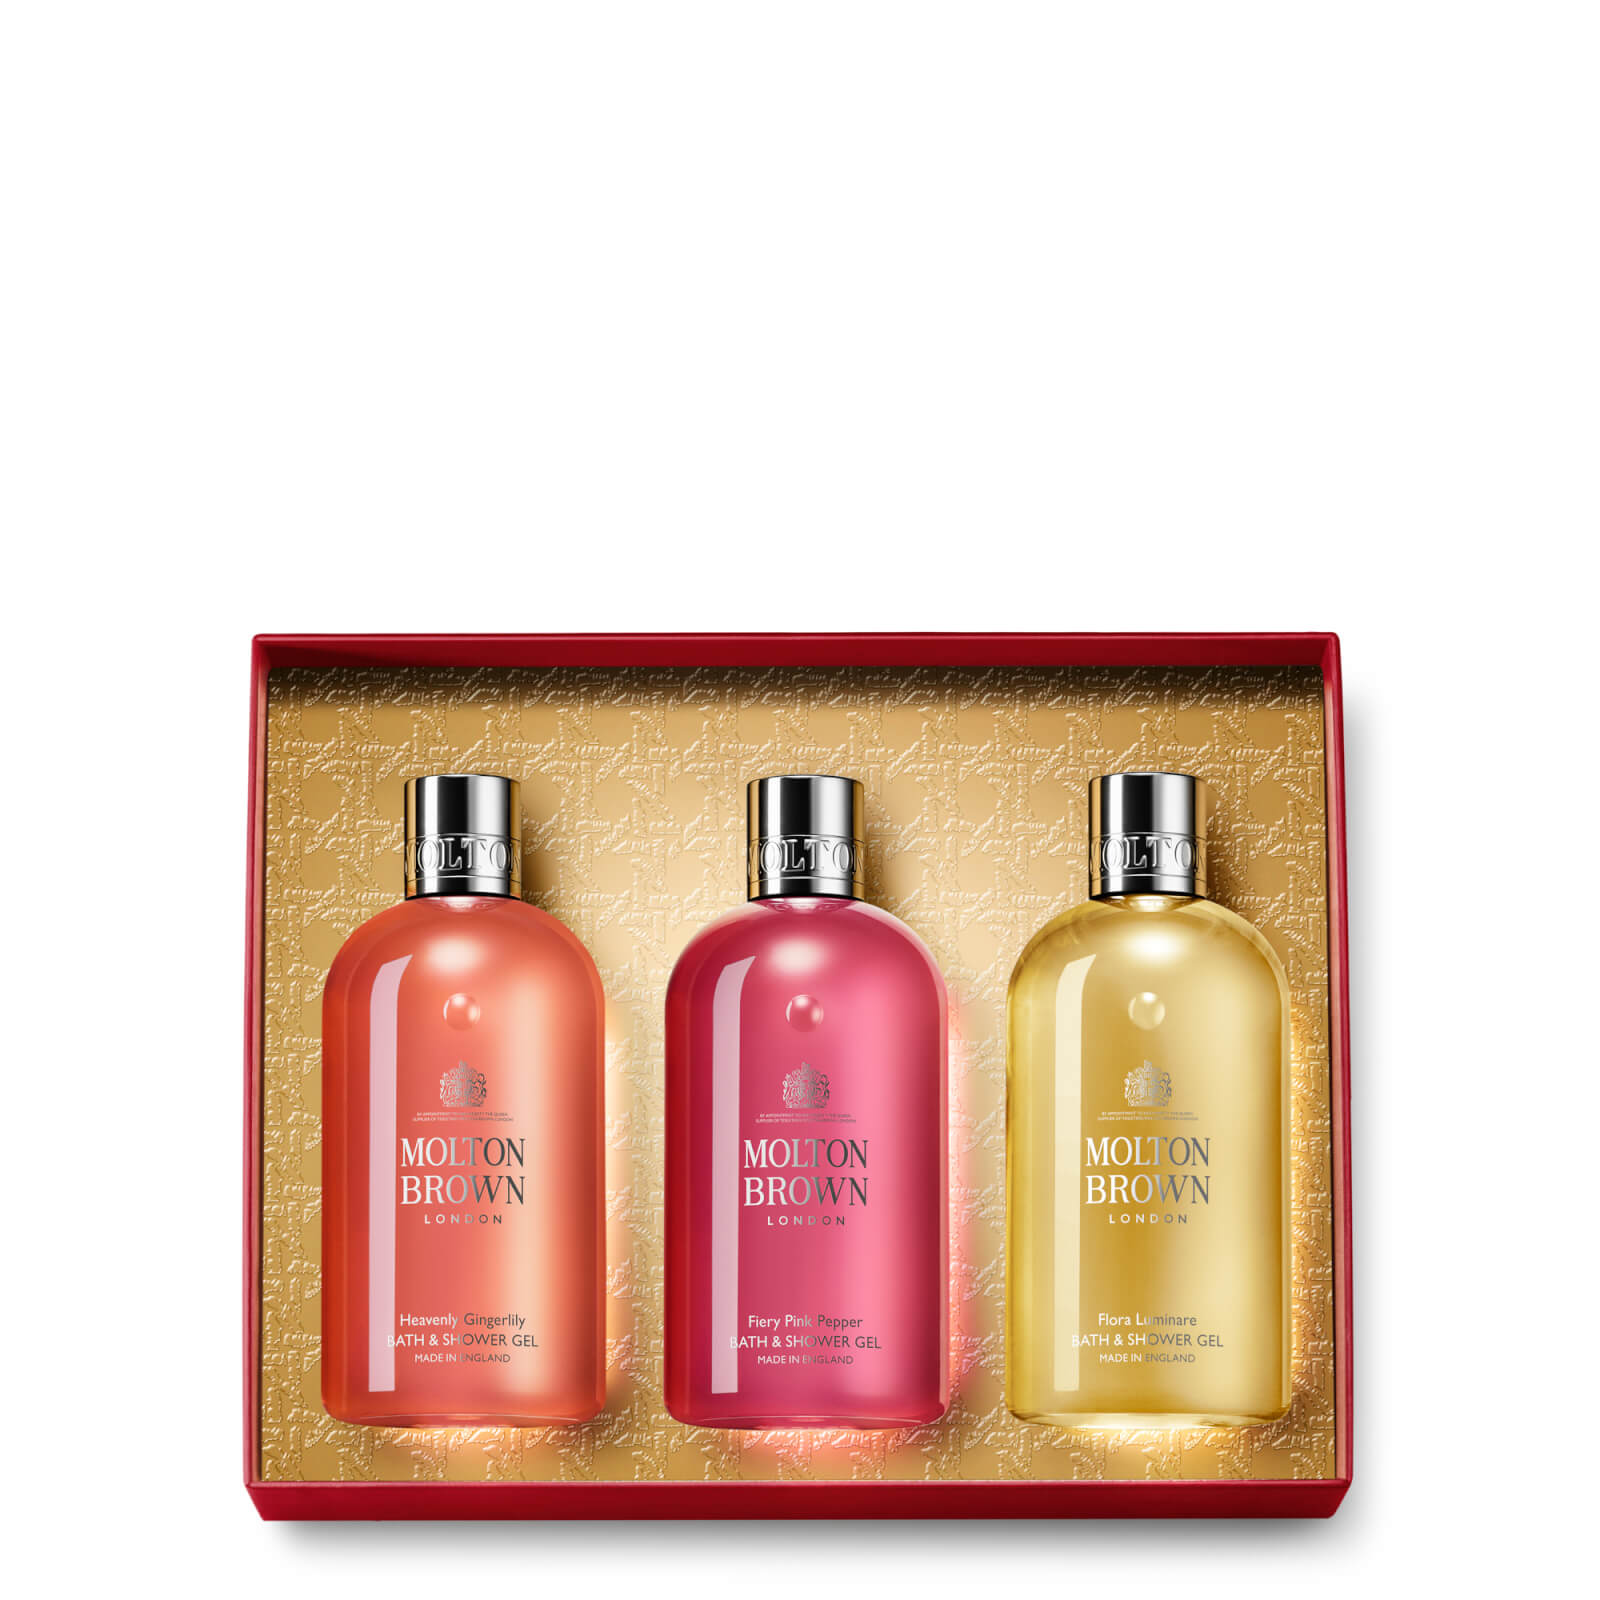 MOLTON BROWN MOLTON BROWN FLORAL AND SPICY BODY CARE GIFT SET